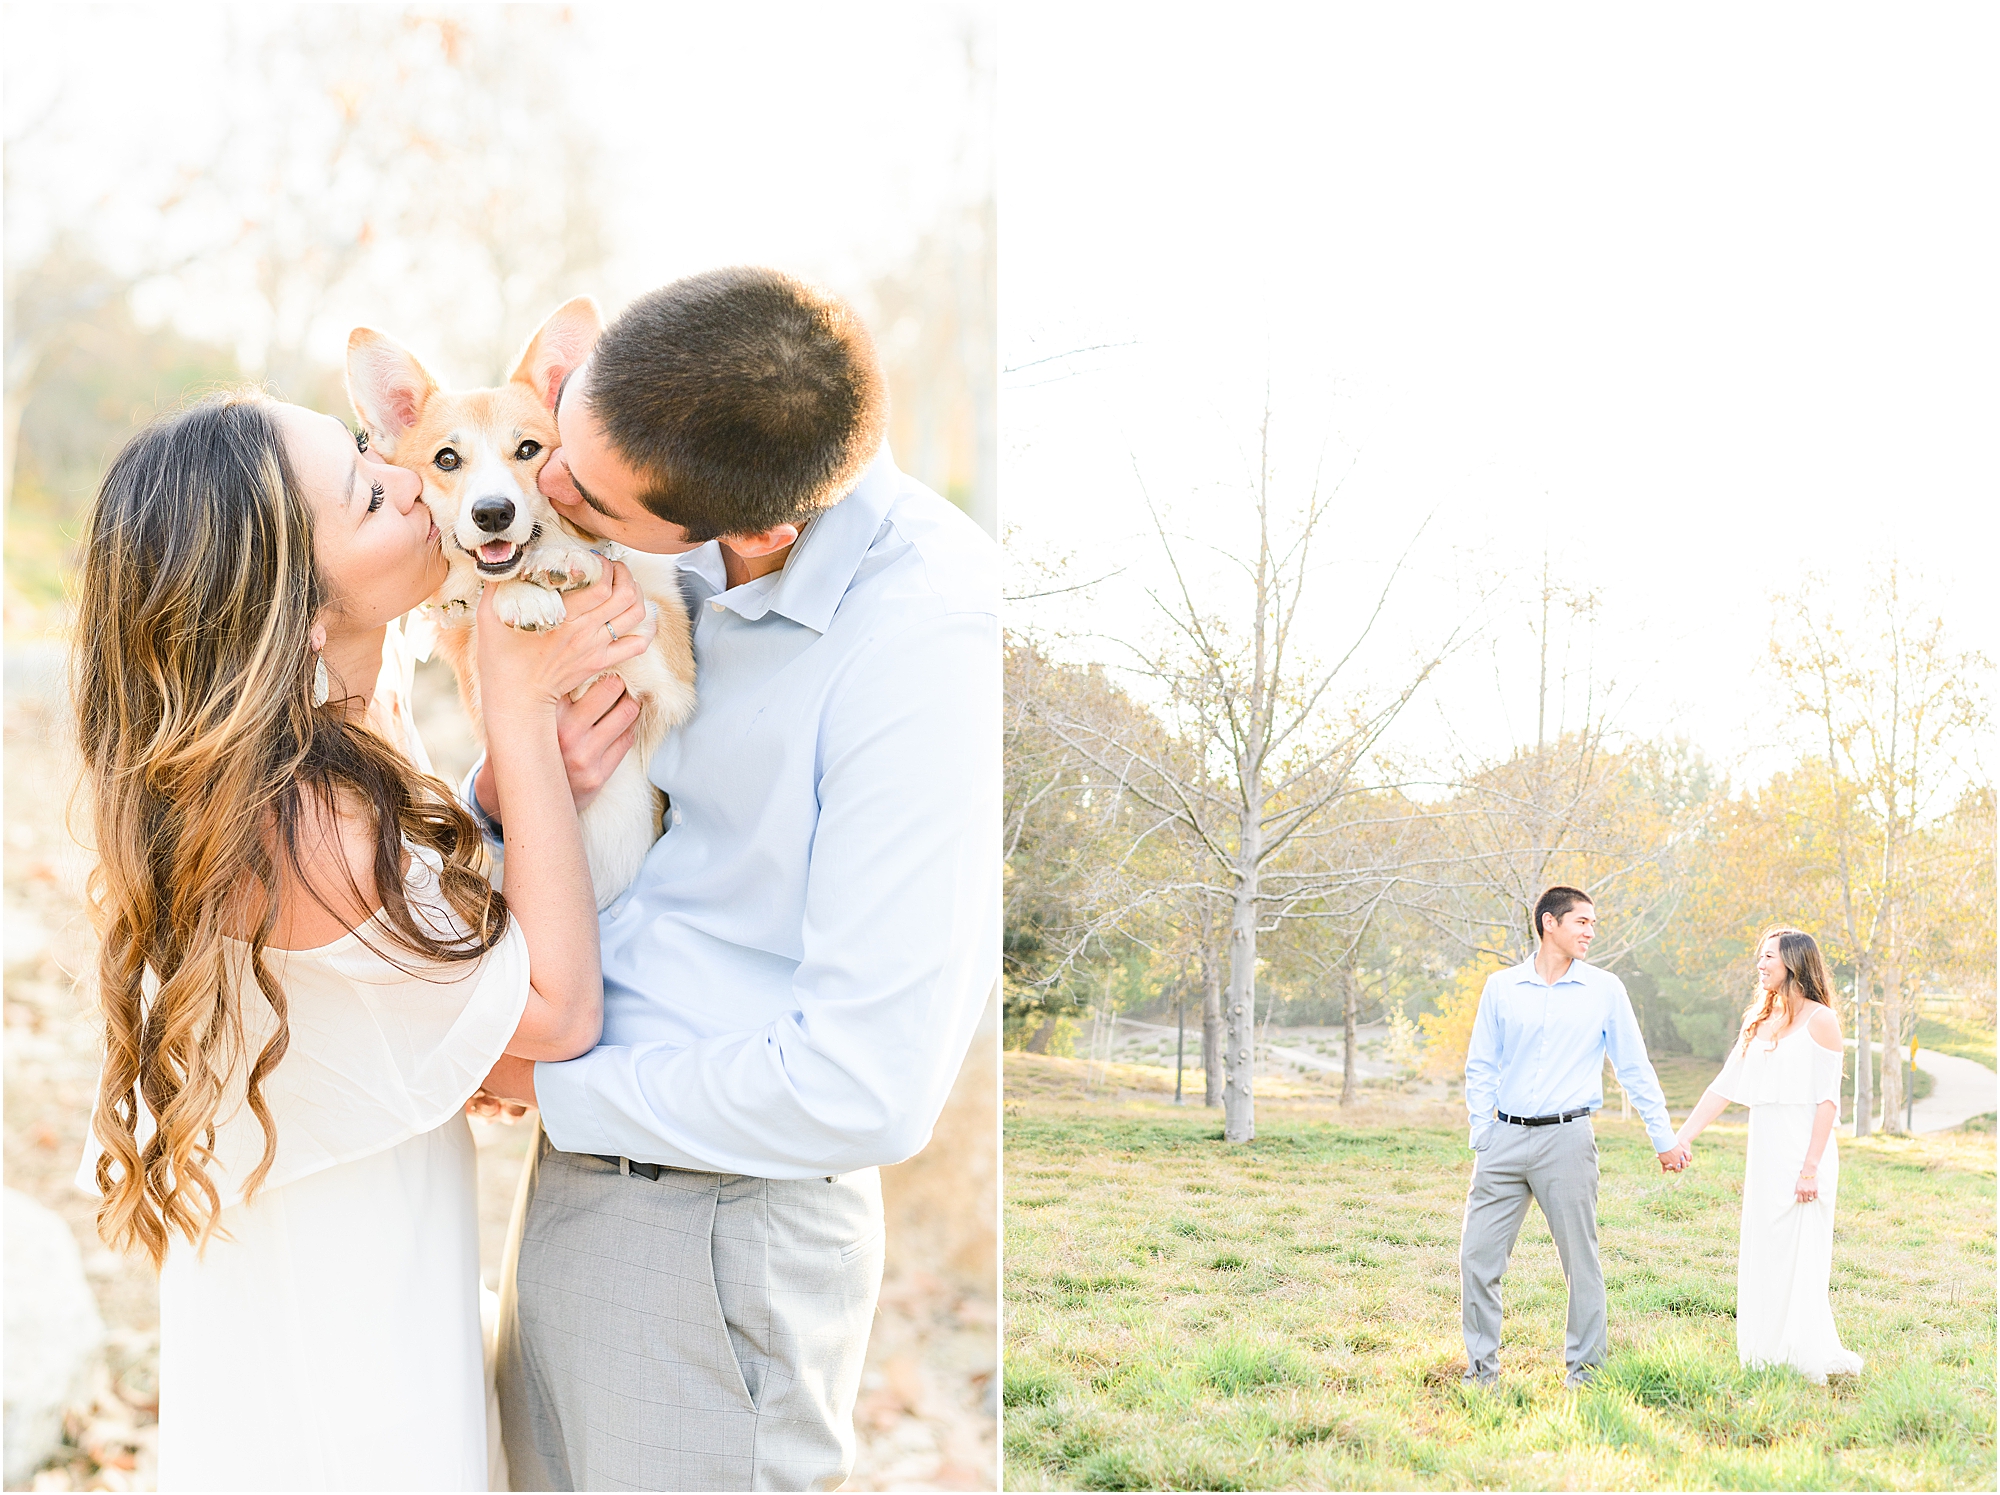 Sunset engagement session with a dog